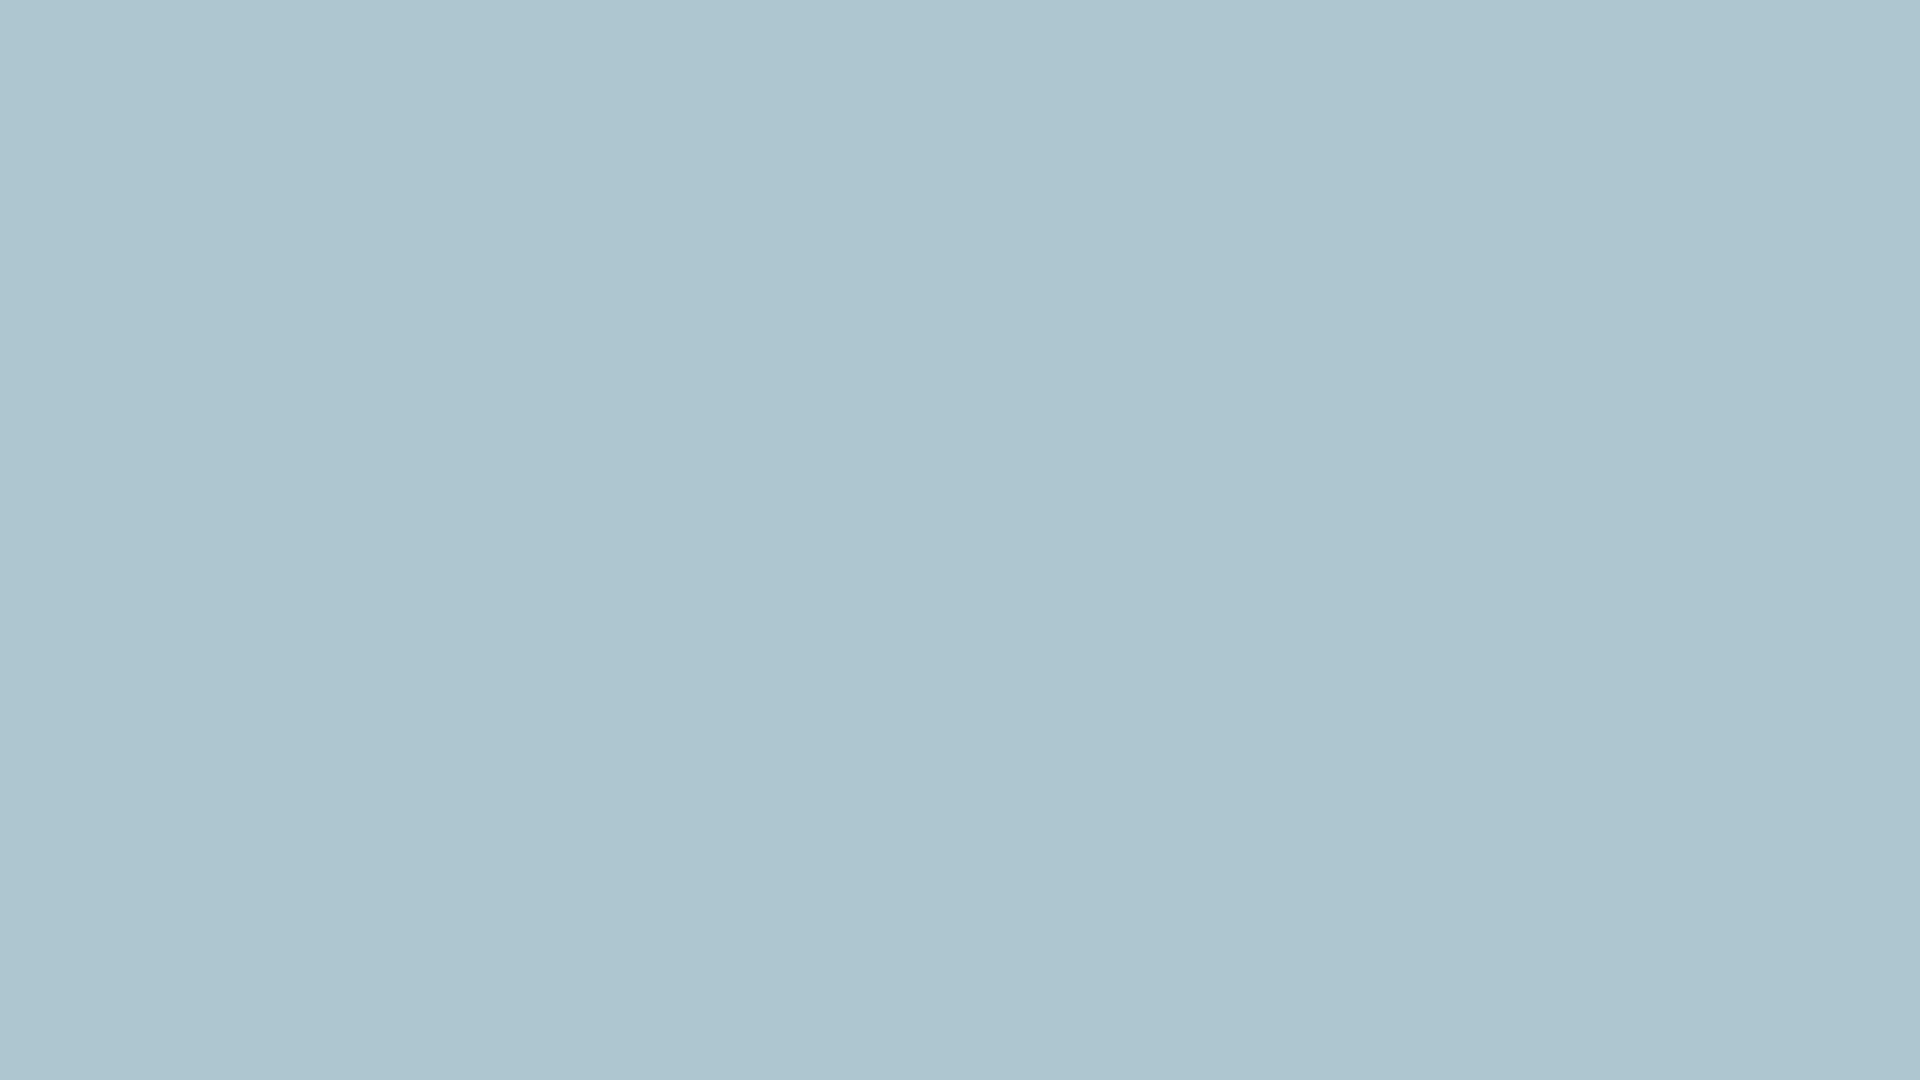 Free 1920x1080 resolution Pastel Blue solid color background view and